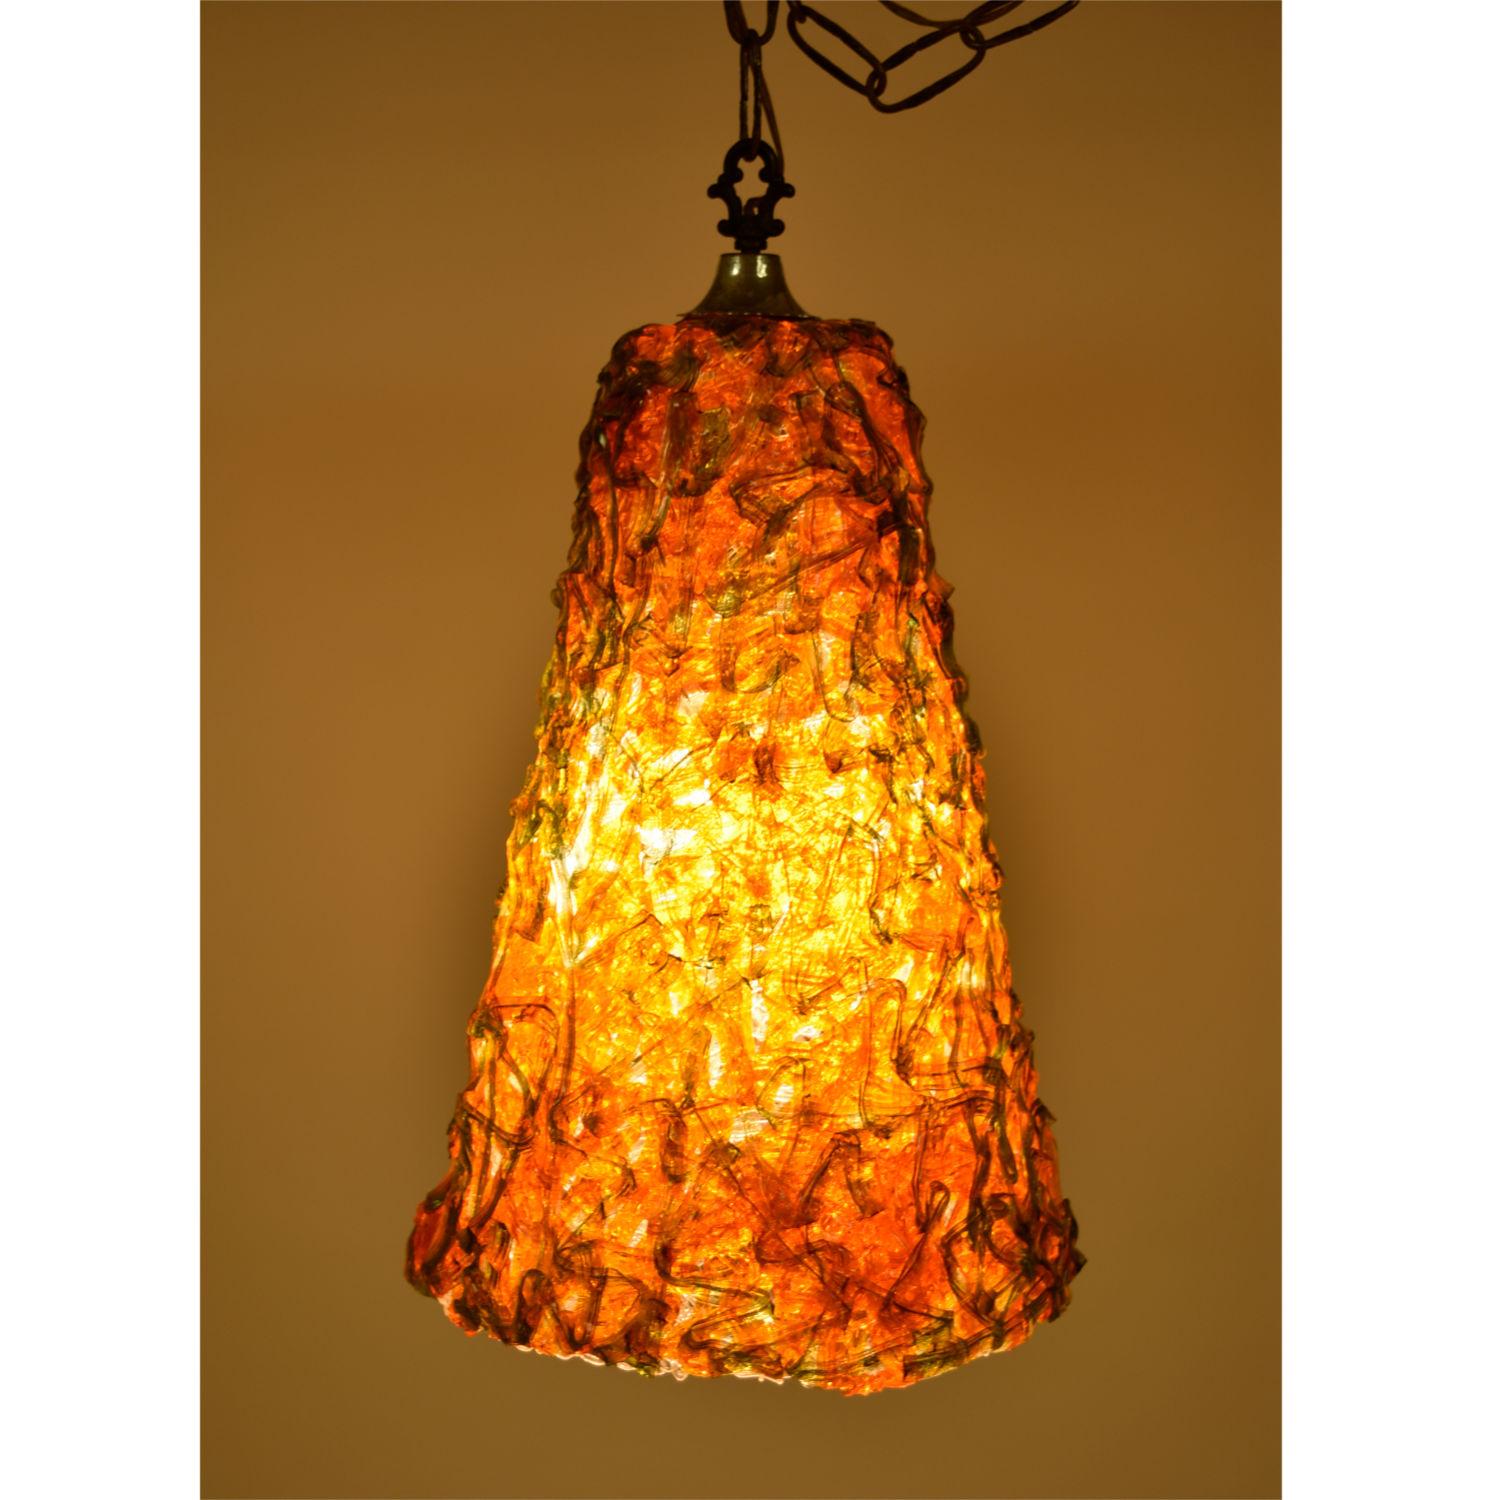 Super funky spaghetti lucite pendant lamp. Orange and green are the perfect mid-mod colors! These brilliant hues have not faded over time. The cone shaped pendant looks just as good off as it does lit up. This lamp plugs into the wall with a switch